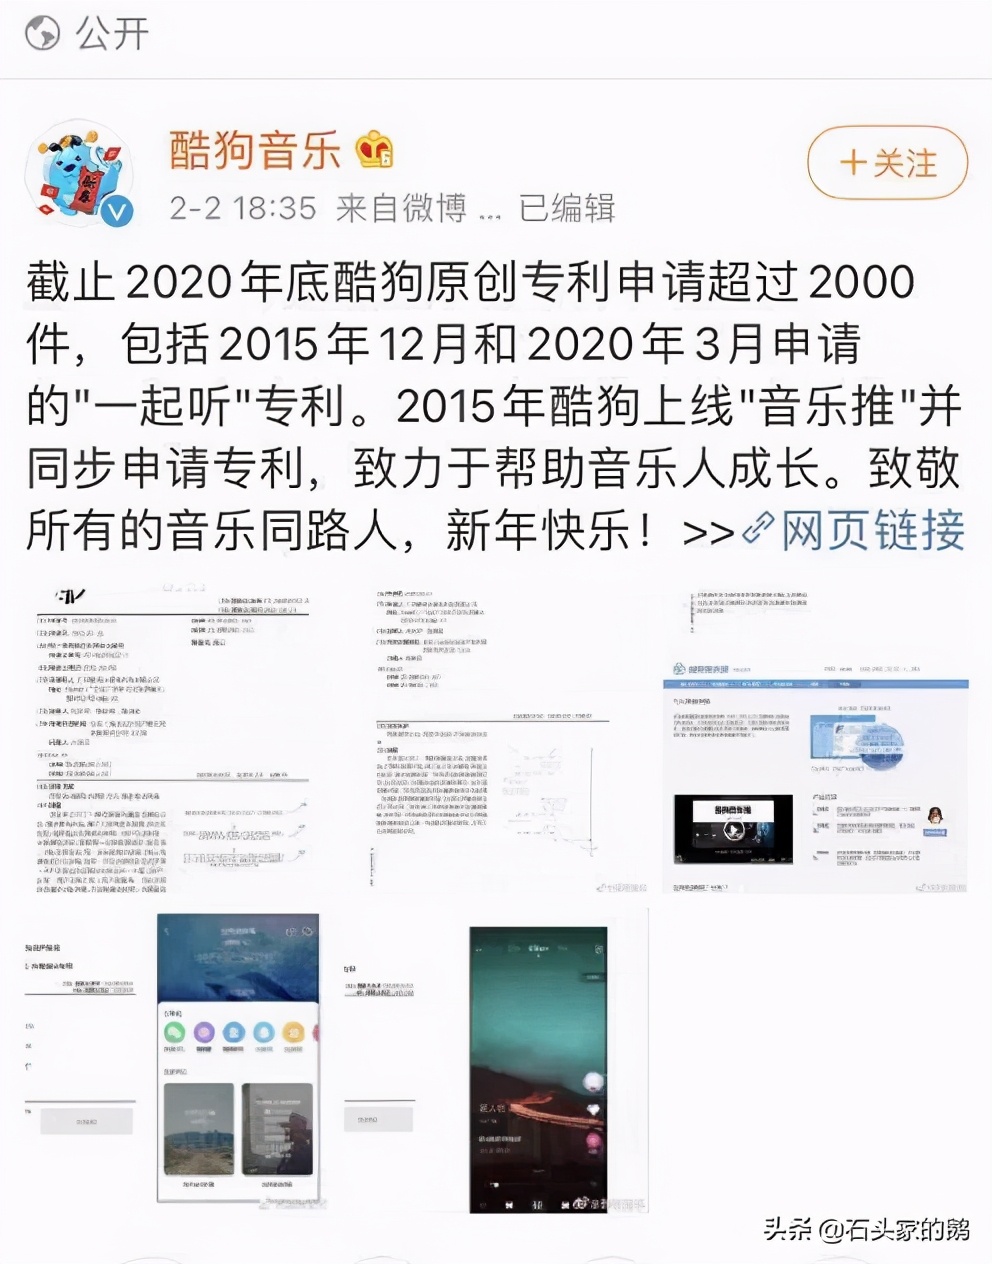 Netease cloud drives the dog that rip cruel, say the other side borroweds irrefutable evidence, patent documentation incongruous